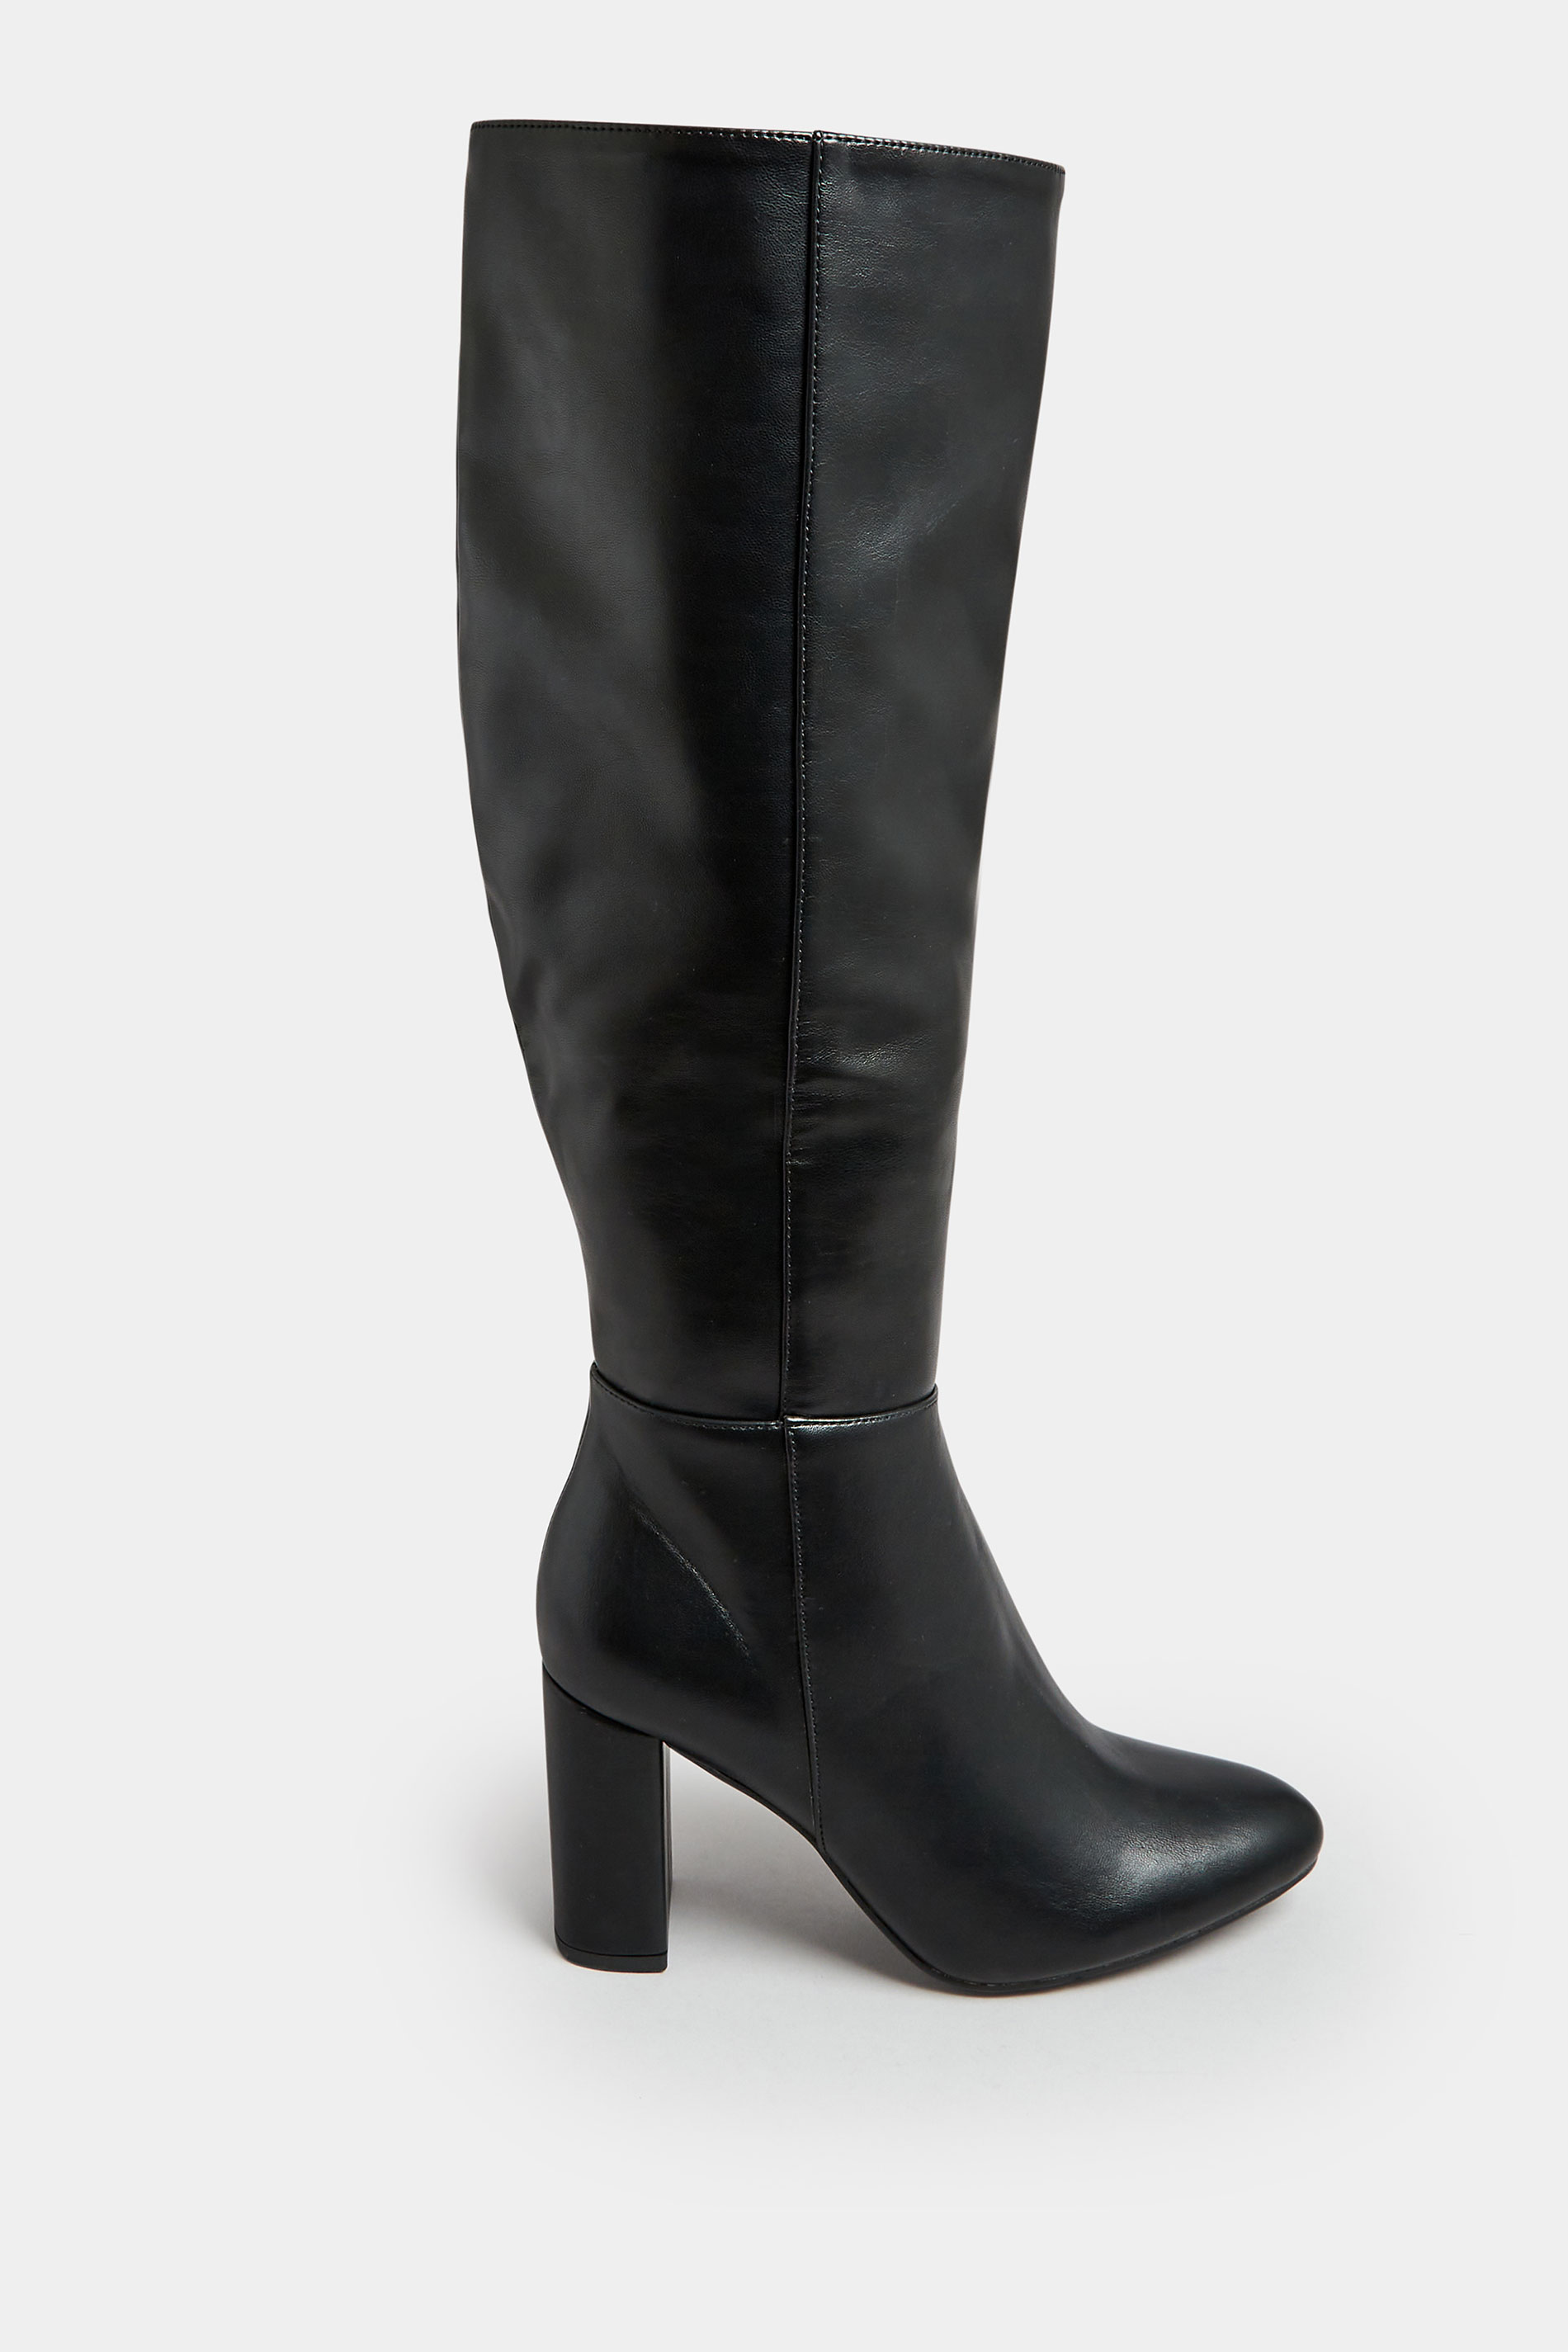 Black Heeled Knee High Boots In Wide E Fit & Extra Wide EEE Fit | Yours ...